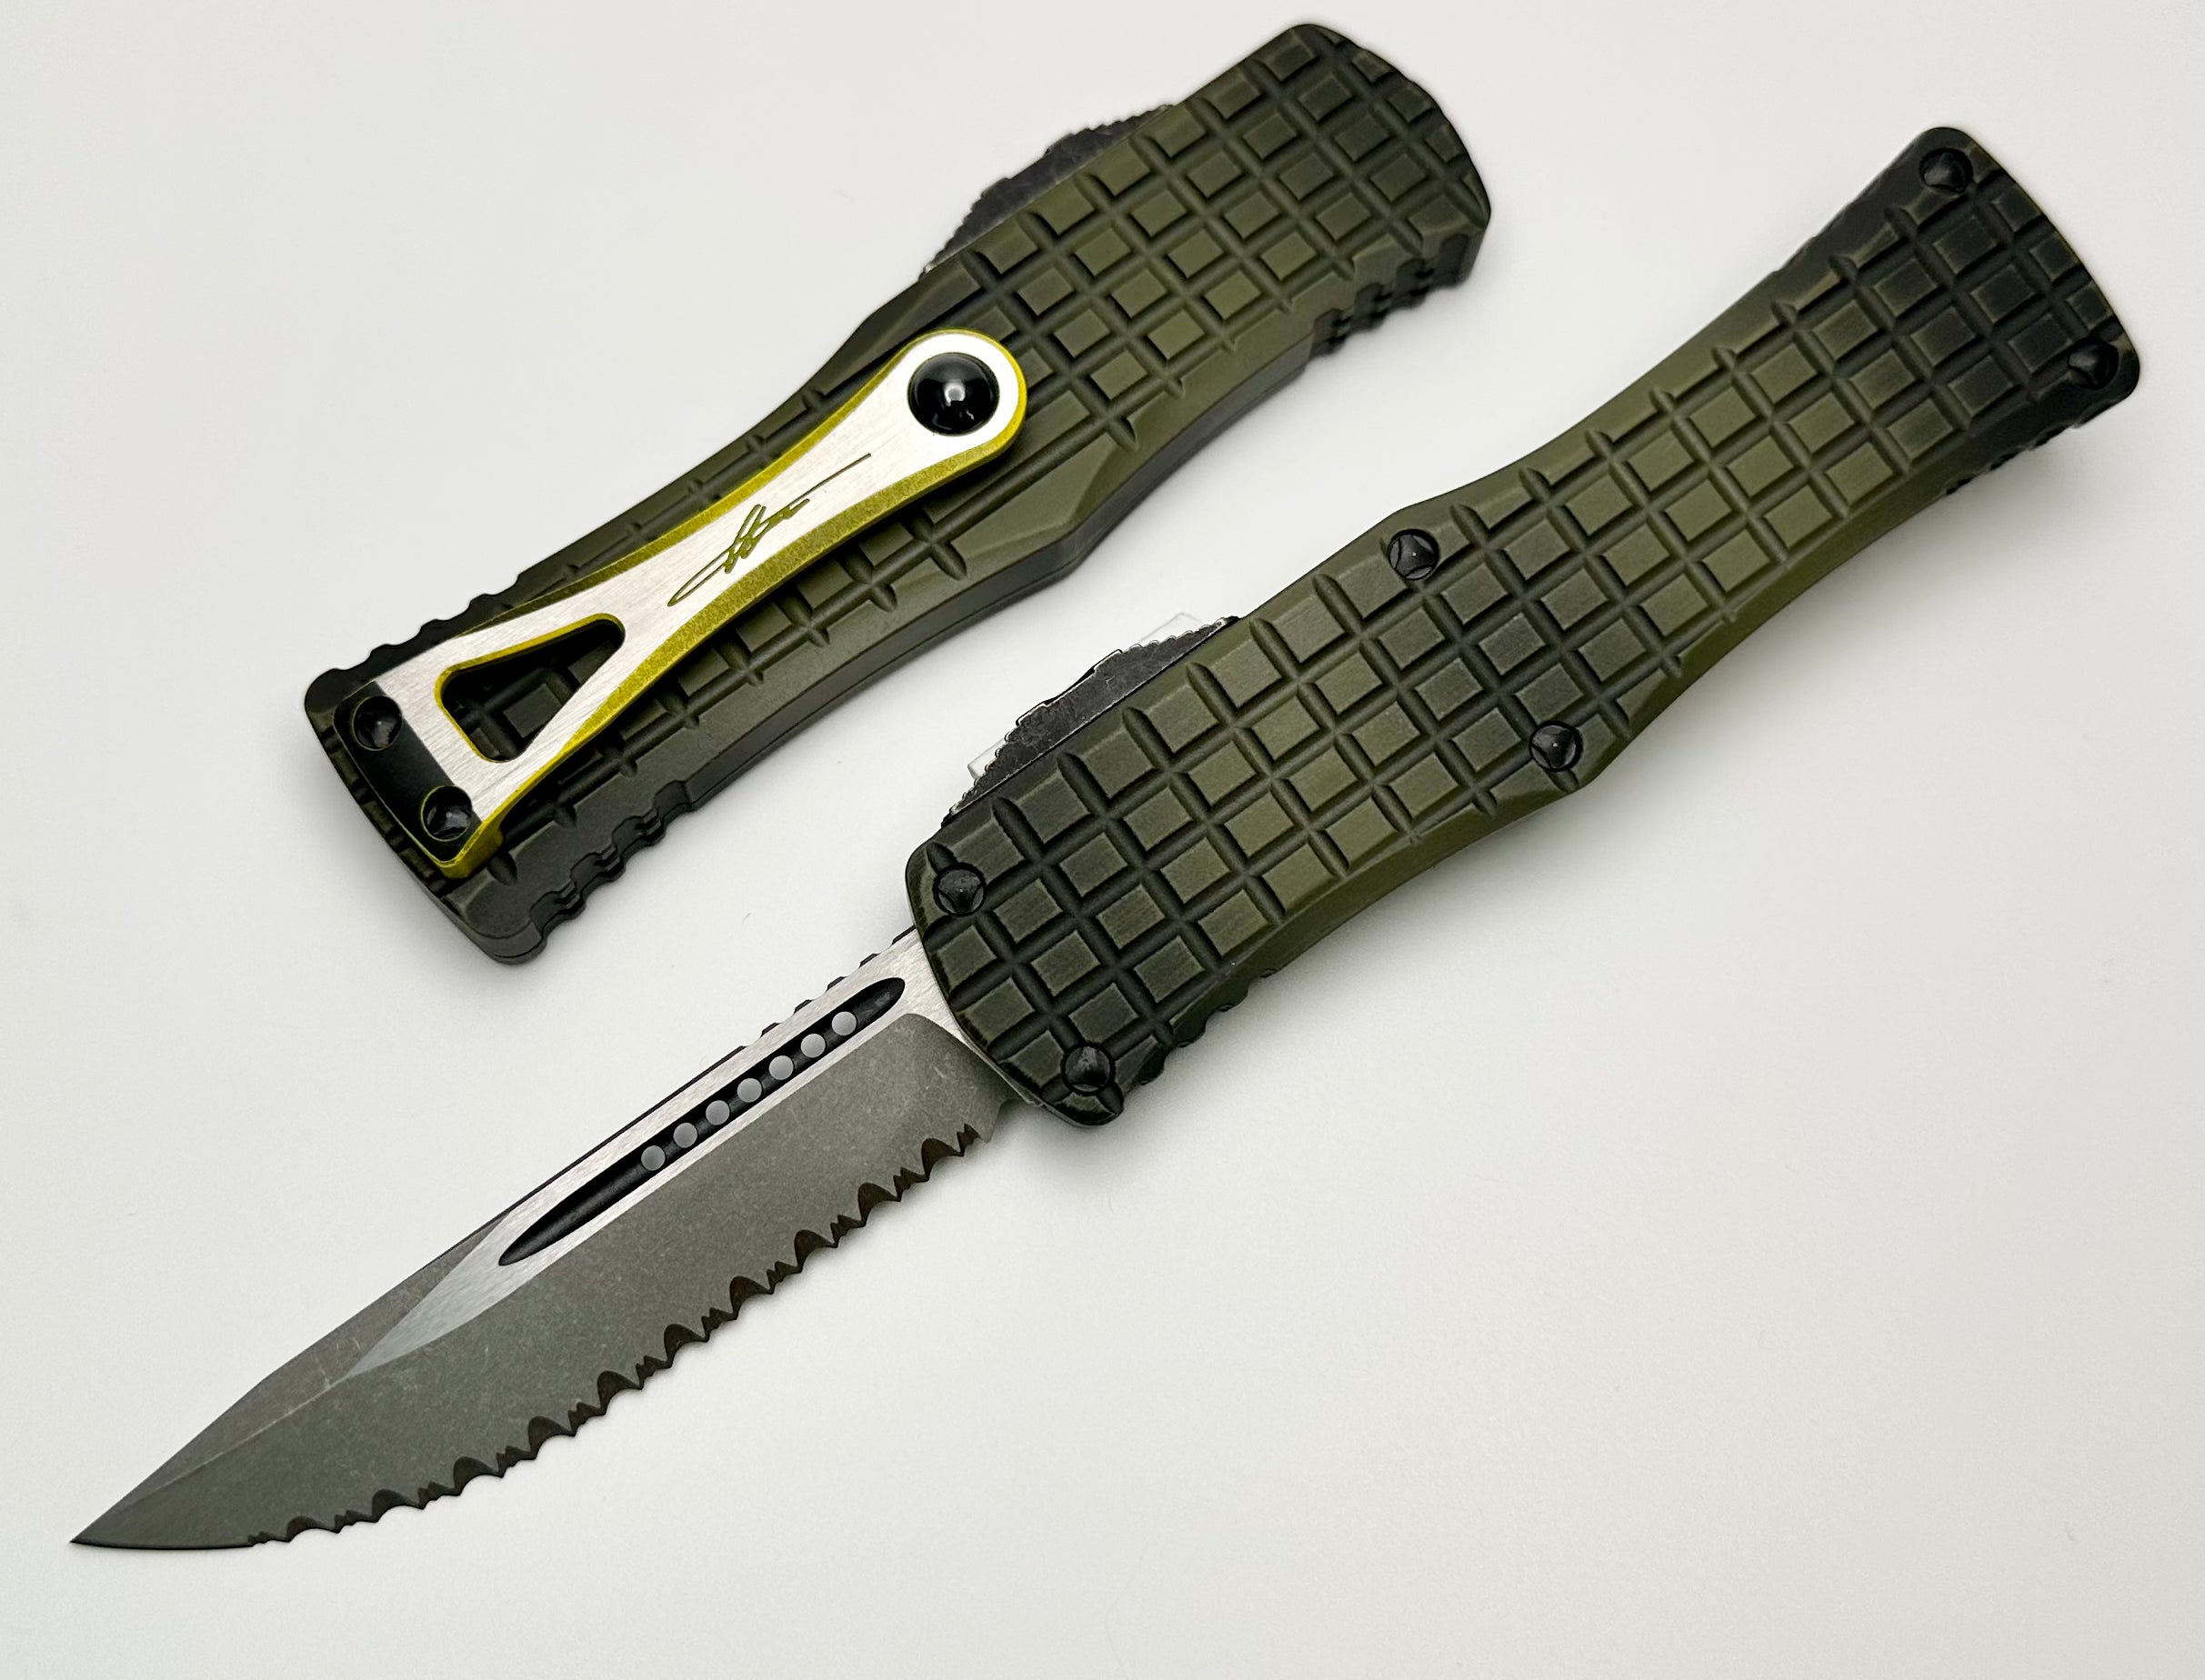 Microtech - 703-12APFRGS - Hera Signature Series Automatic OTF Apocalyptic  Frag Fully Serrated Knife - Grenade Green - Sharp Things OKC